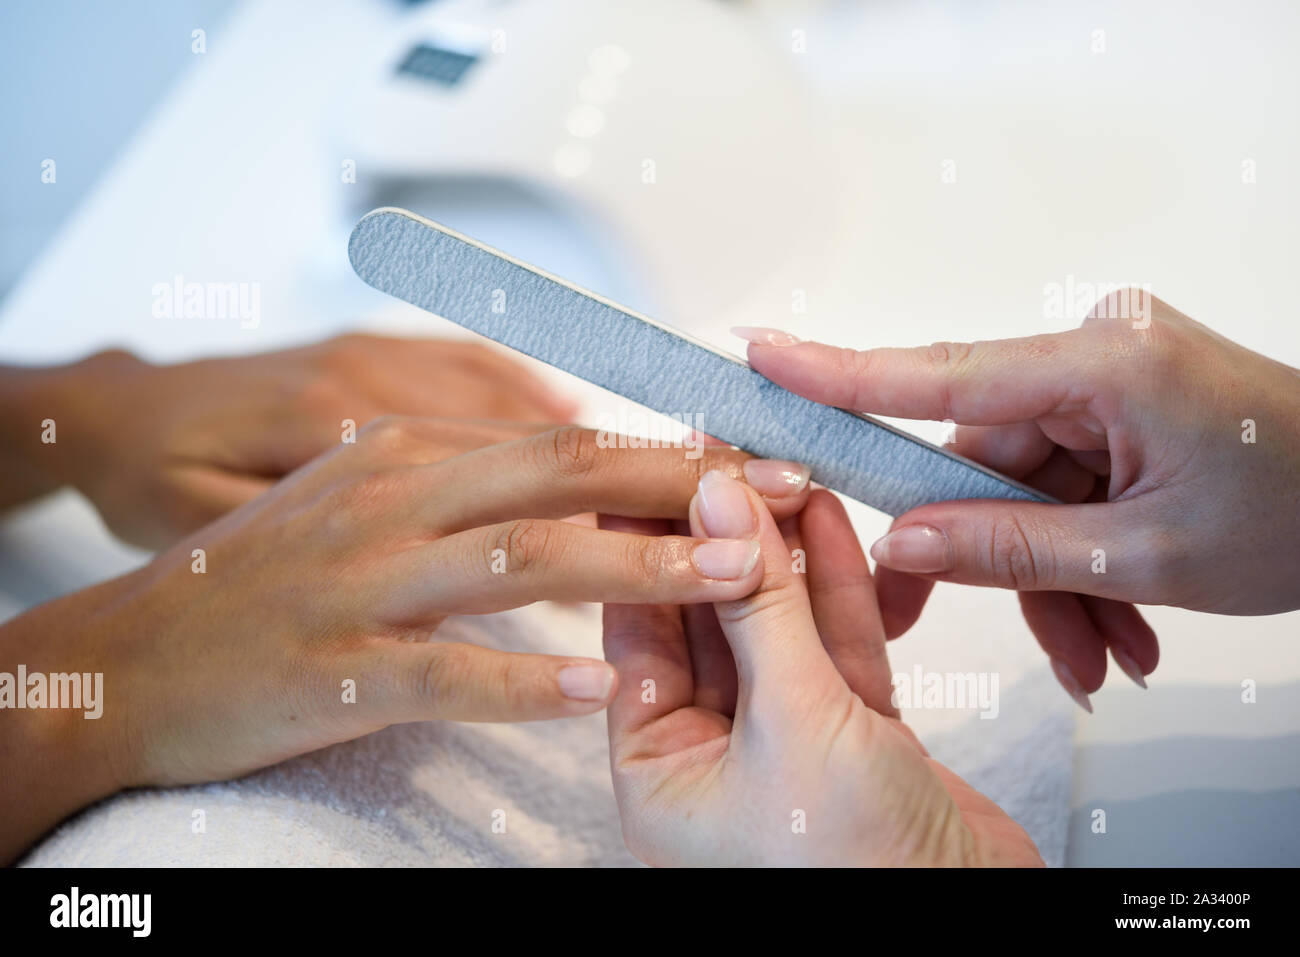 Woman in a nails salon receiving a manicure with nail file Stock Photo